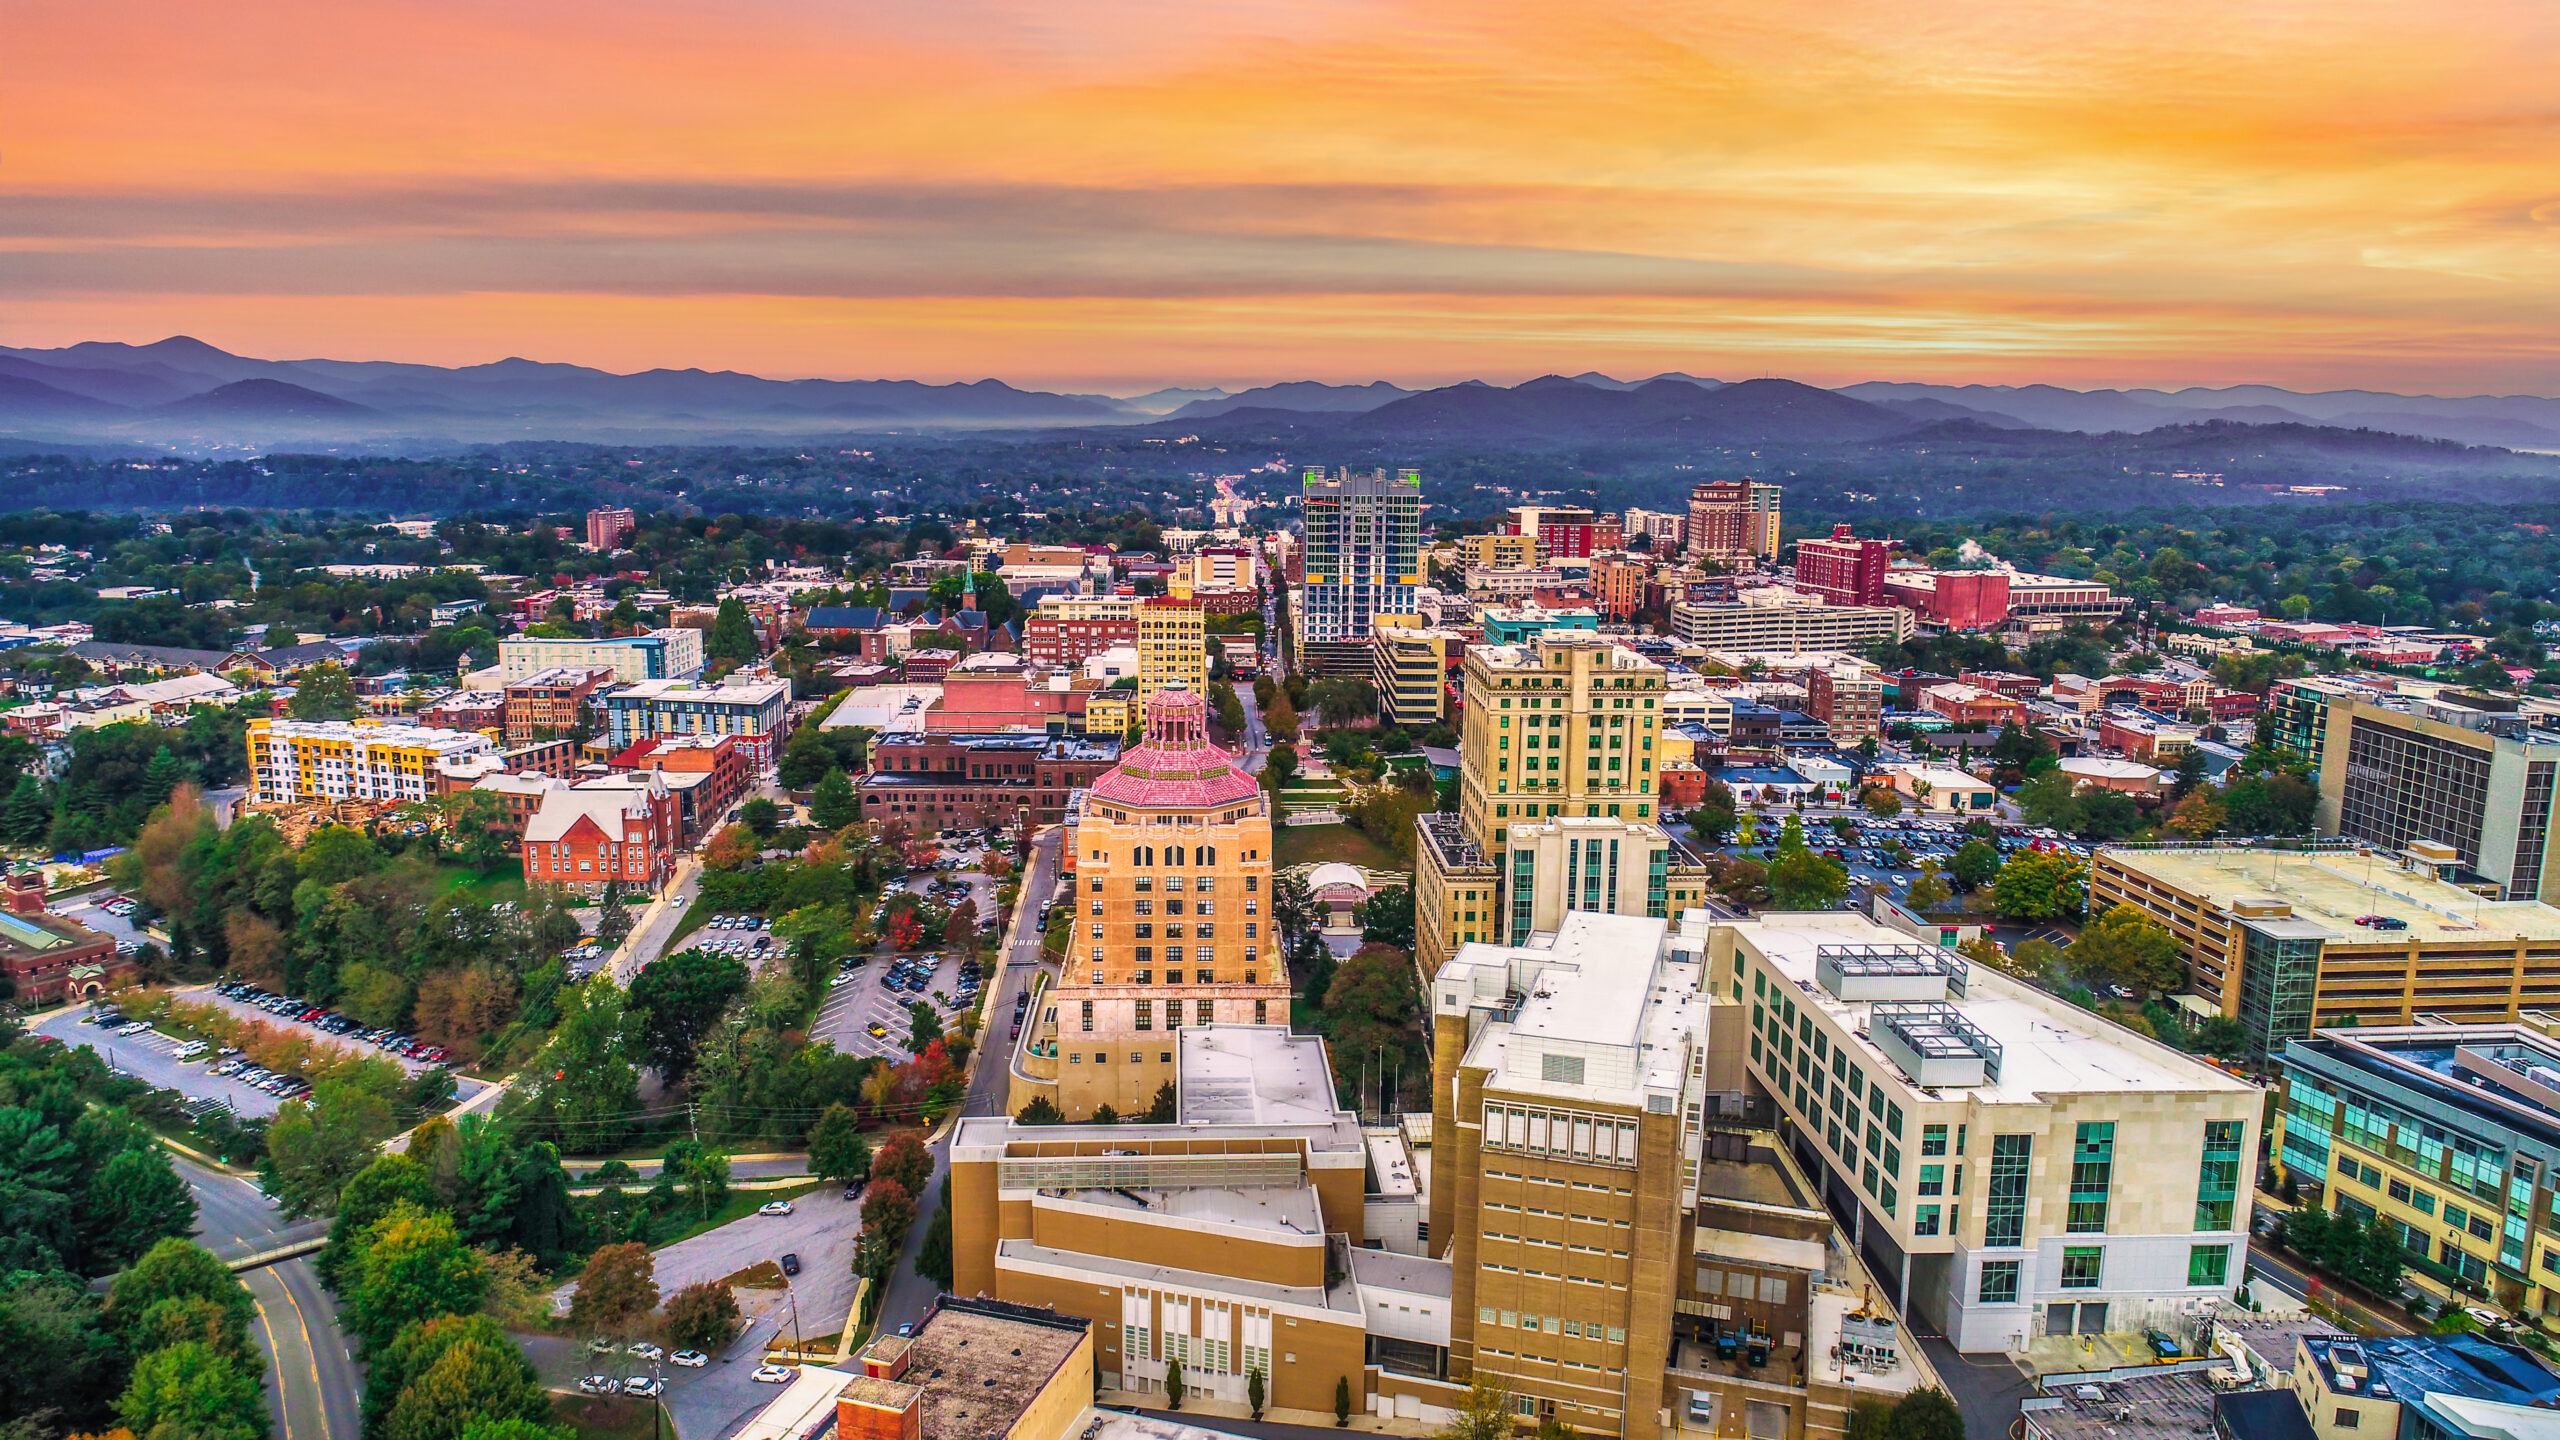 aerial photo of Asheville at sunset, there are buildings, parking lots, roads, mountains, and parks in the photo